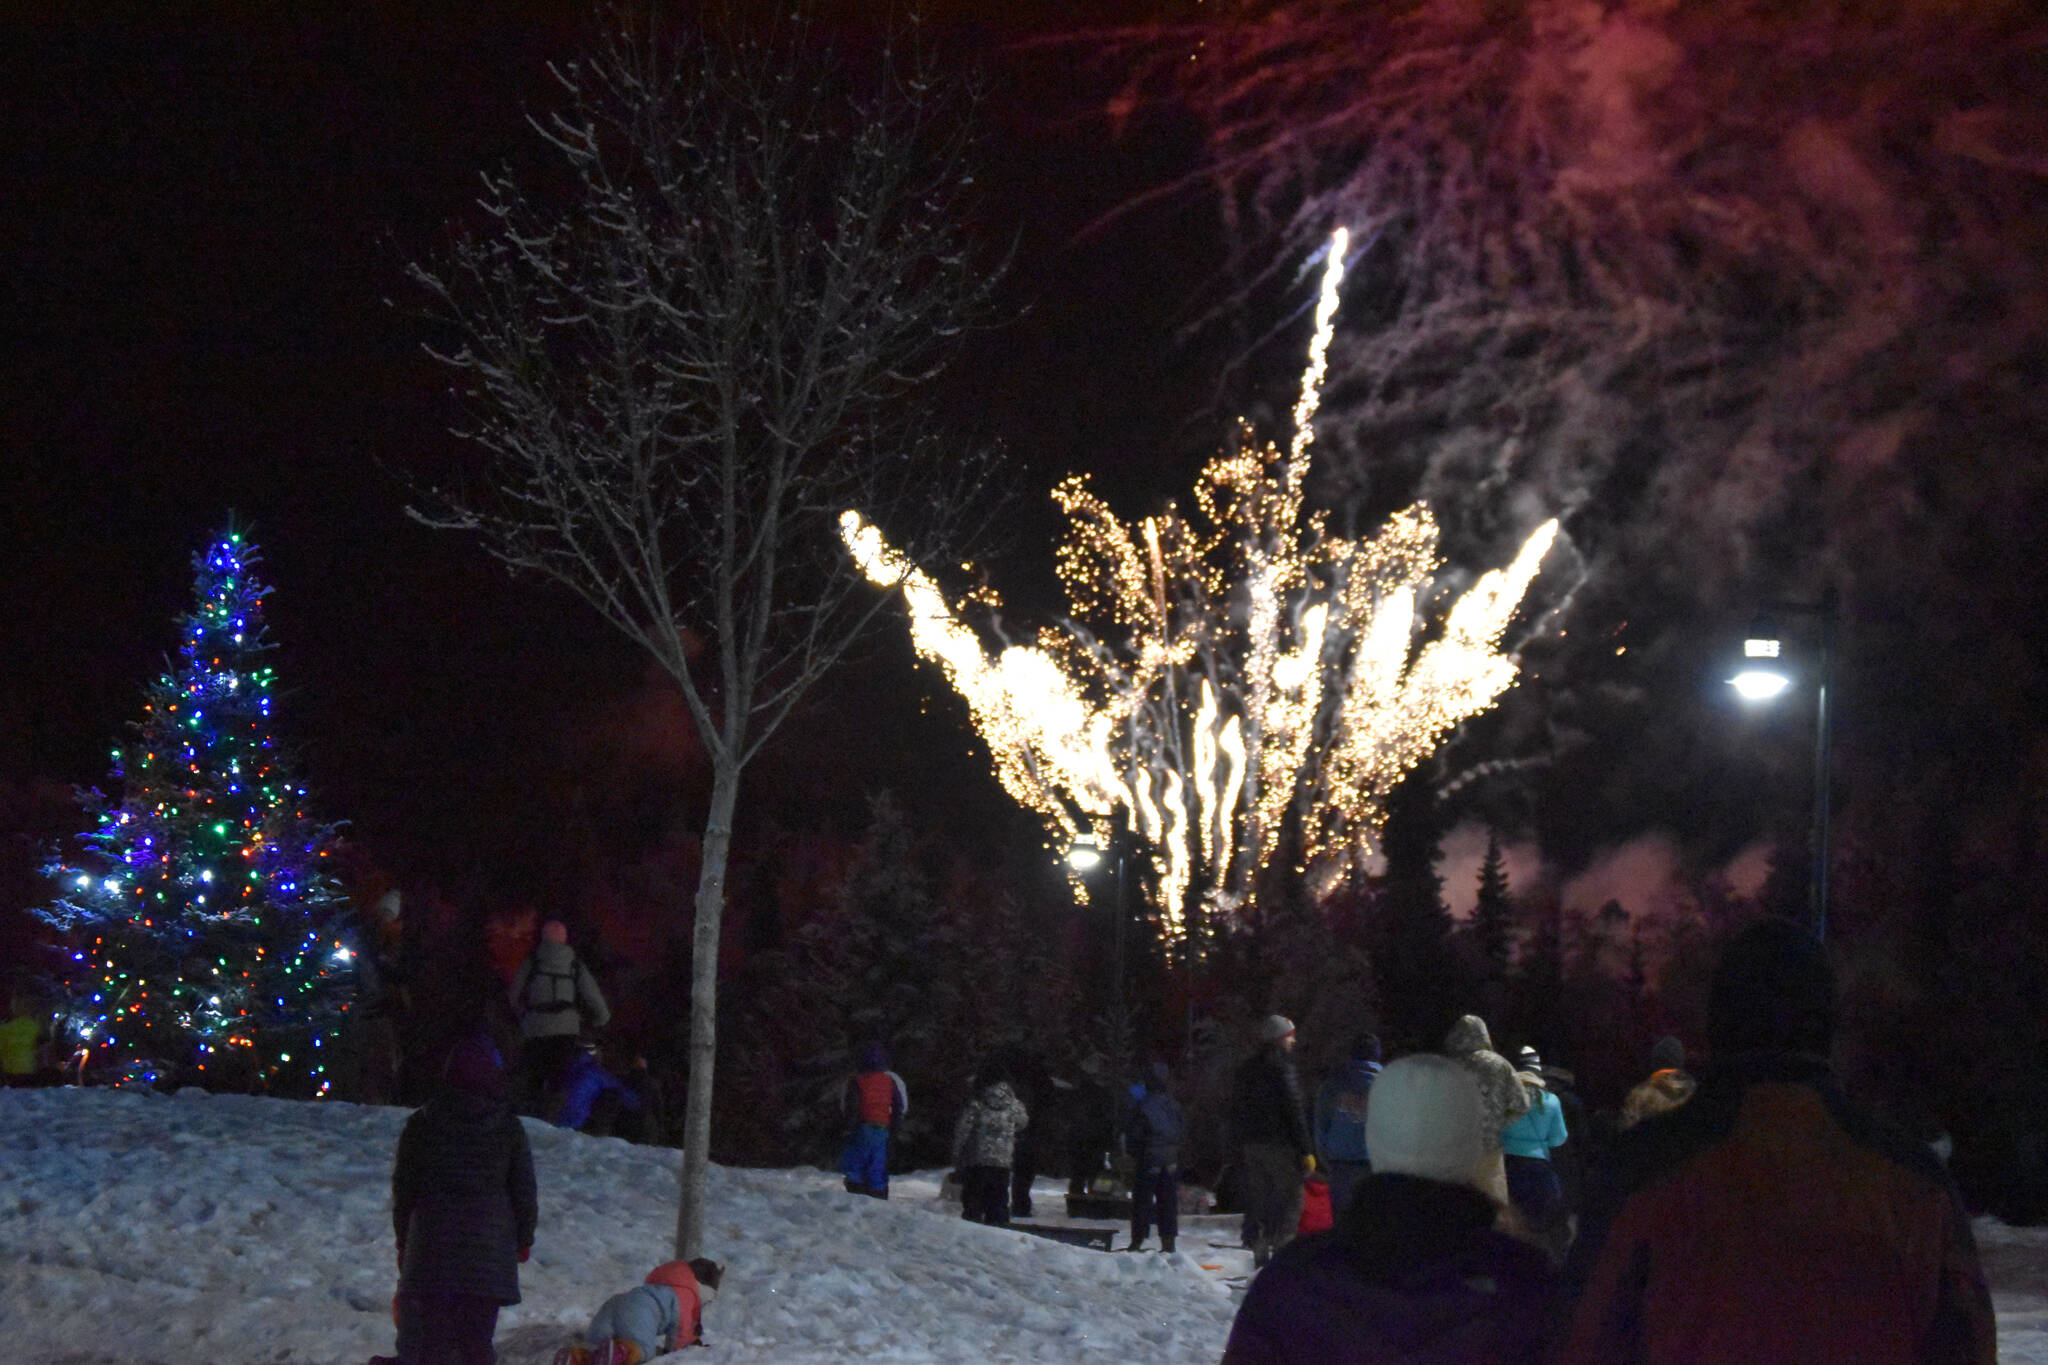 Fireworks explode before a crowd of attendees at Christmas in the Park on Saturday, Dec. 3, 2022, in Soldotna, Alaska. (Jake Dye/Peninsula Clarion)